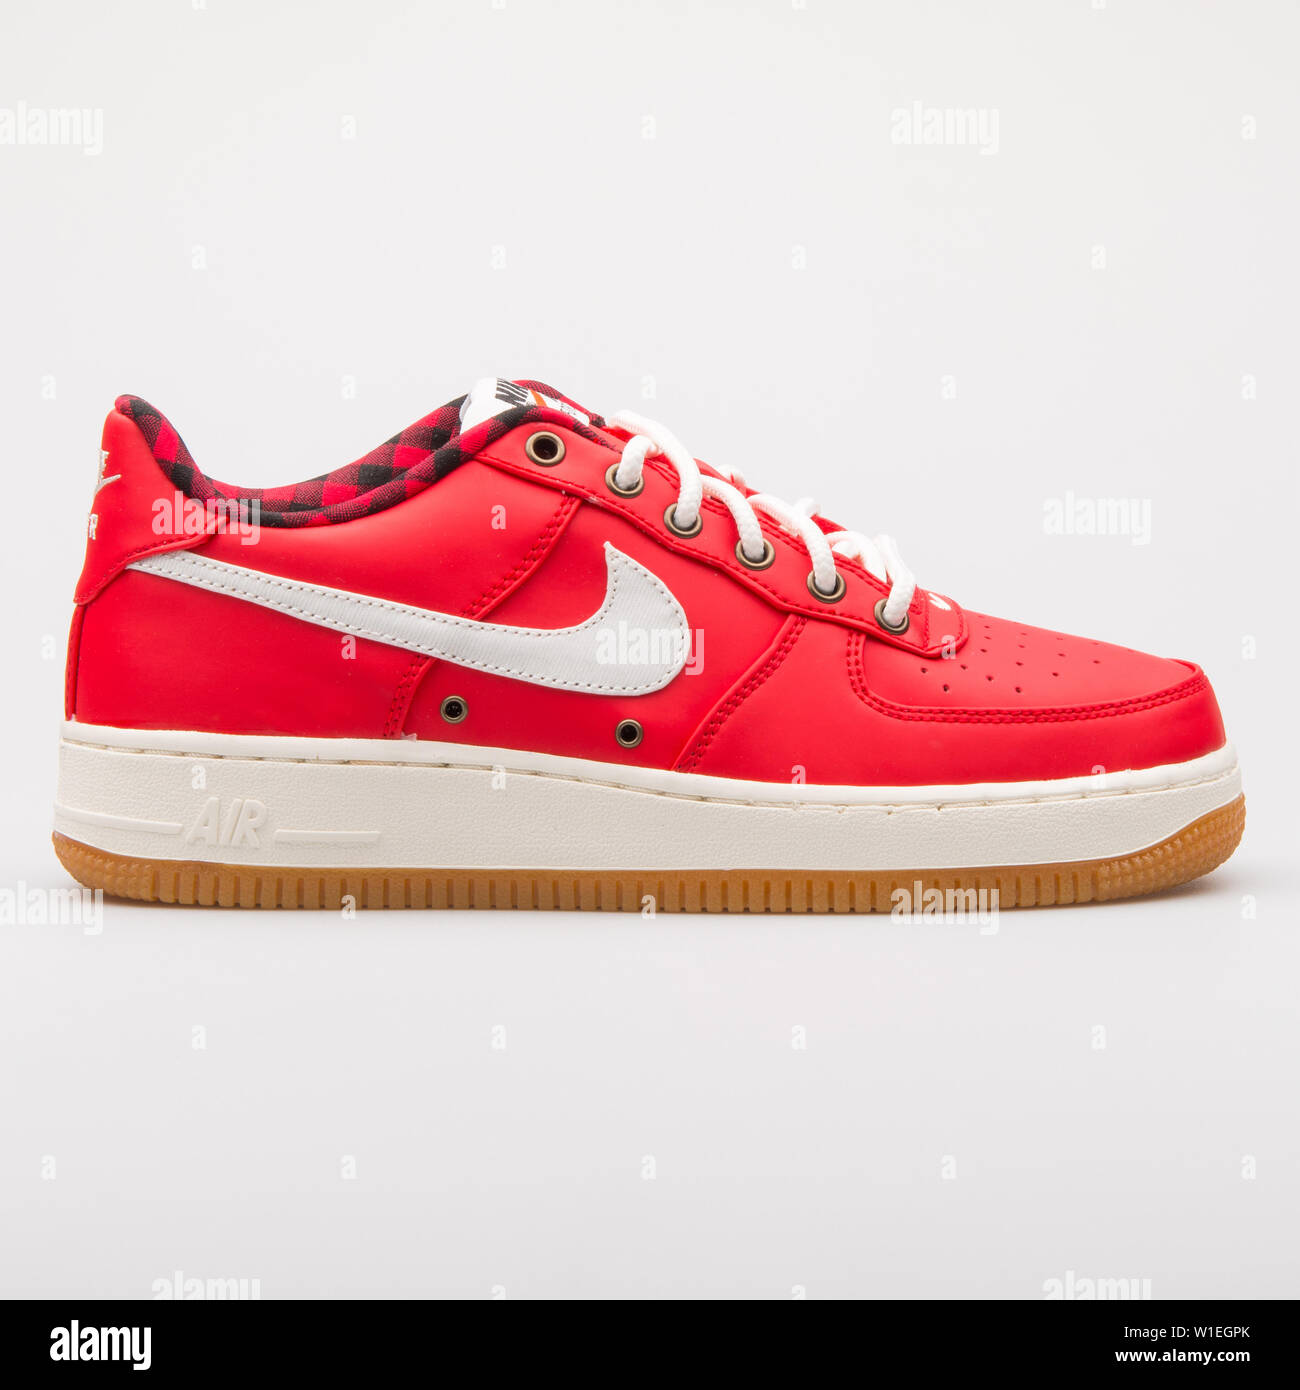 VIENNA, AUSTRIA - AUGUST 23, 2017: Nike Air Force 1 LV8 red sneaker on  white background Stock Photo - Alamy